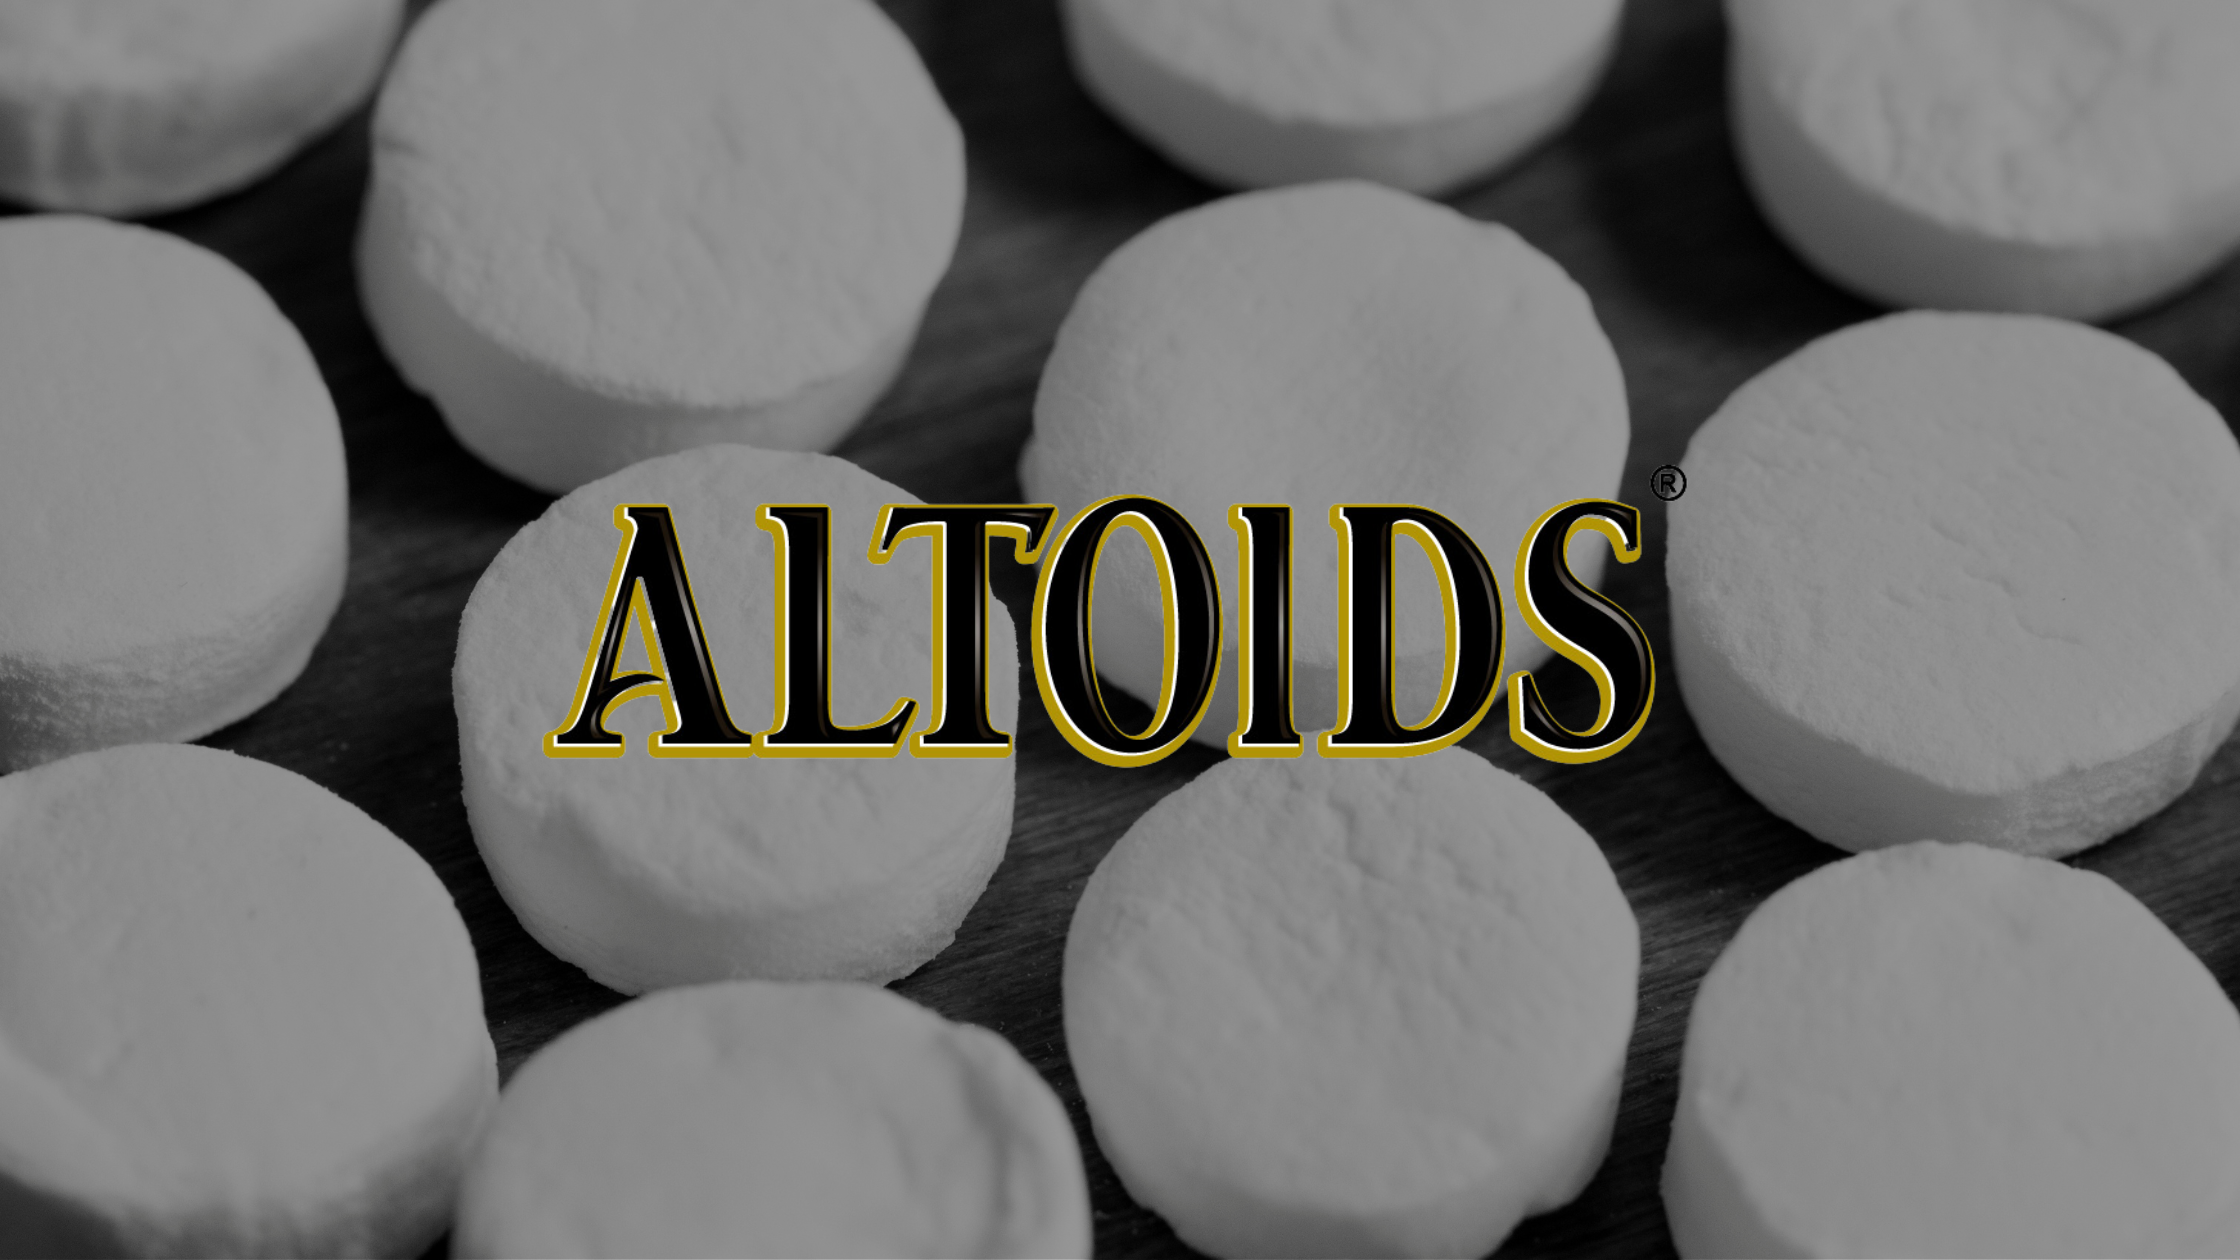 The Ultimate Guide to Altoids Mints at Candy Retailer